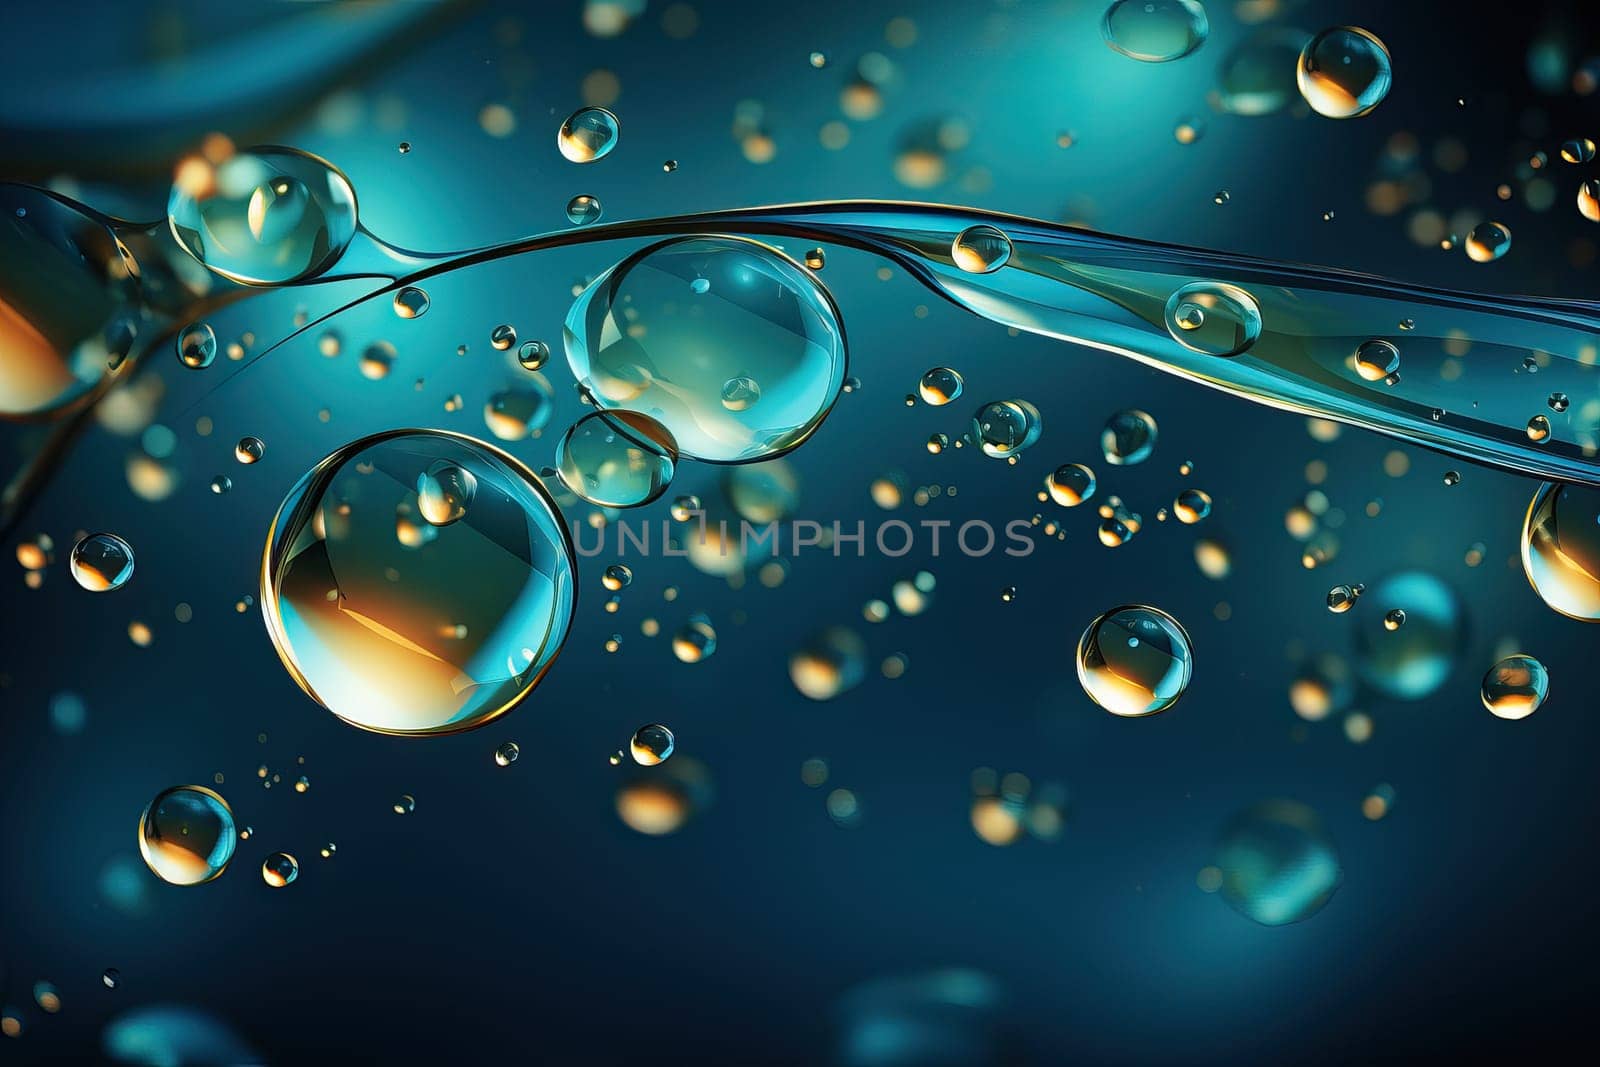 Aquamarine bubbles with green slight tint, abstract background with drops of aquamarine color. by Niko_Cingaryuk